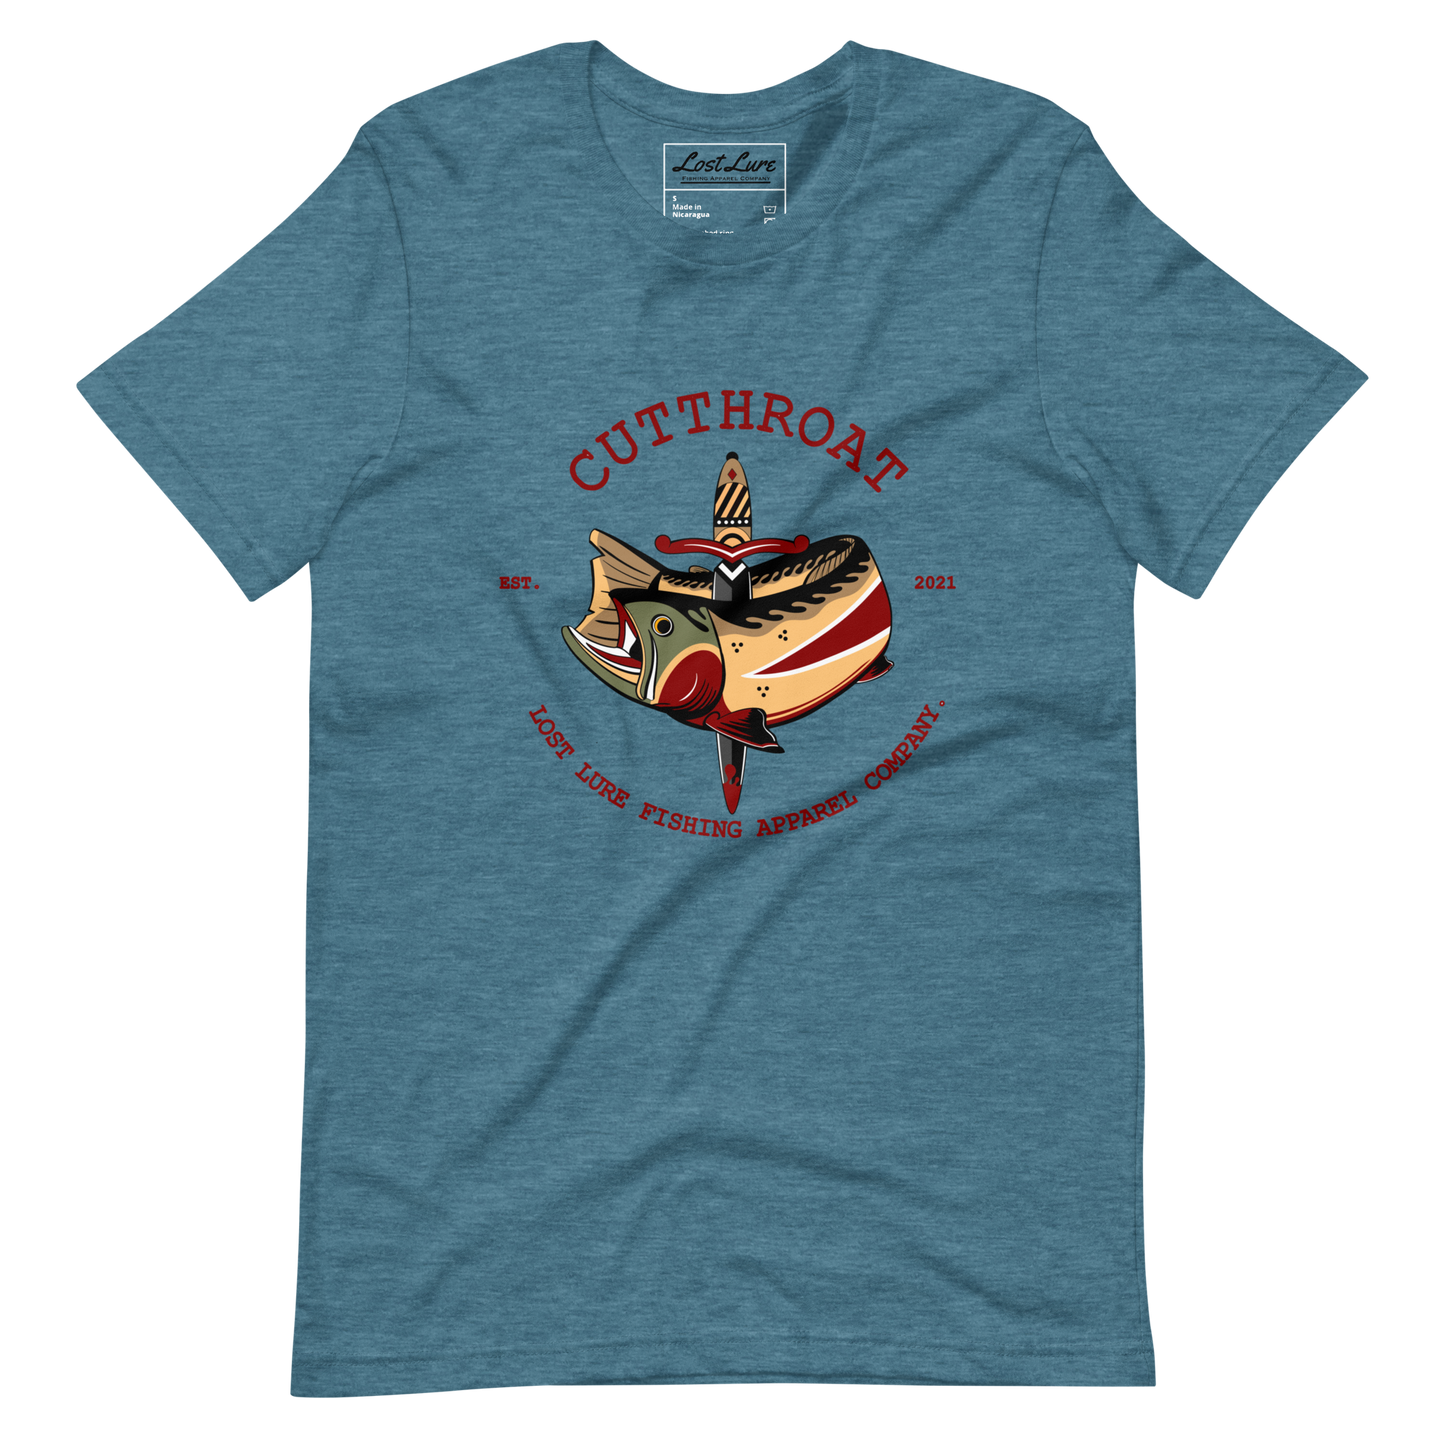 Cutthroat Trout fishing shirt. It’s an American traditional style design with a cutthroat trout and a dagger. The shirt reads Cutthroat trout, est. 2021, lost lure fishing apparel company. The fishing design is on the front of the shirt. Blue fishing shirt, front side